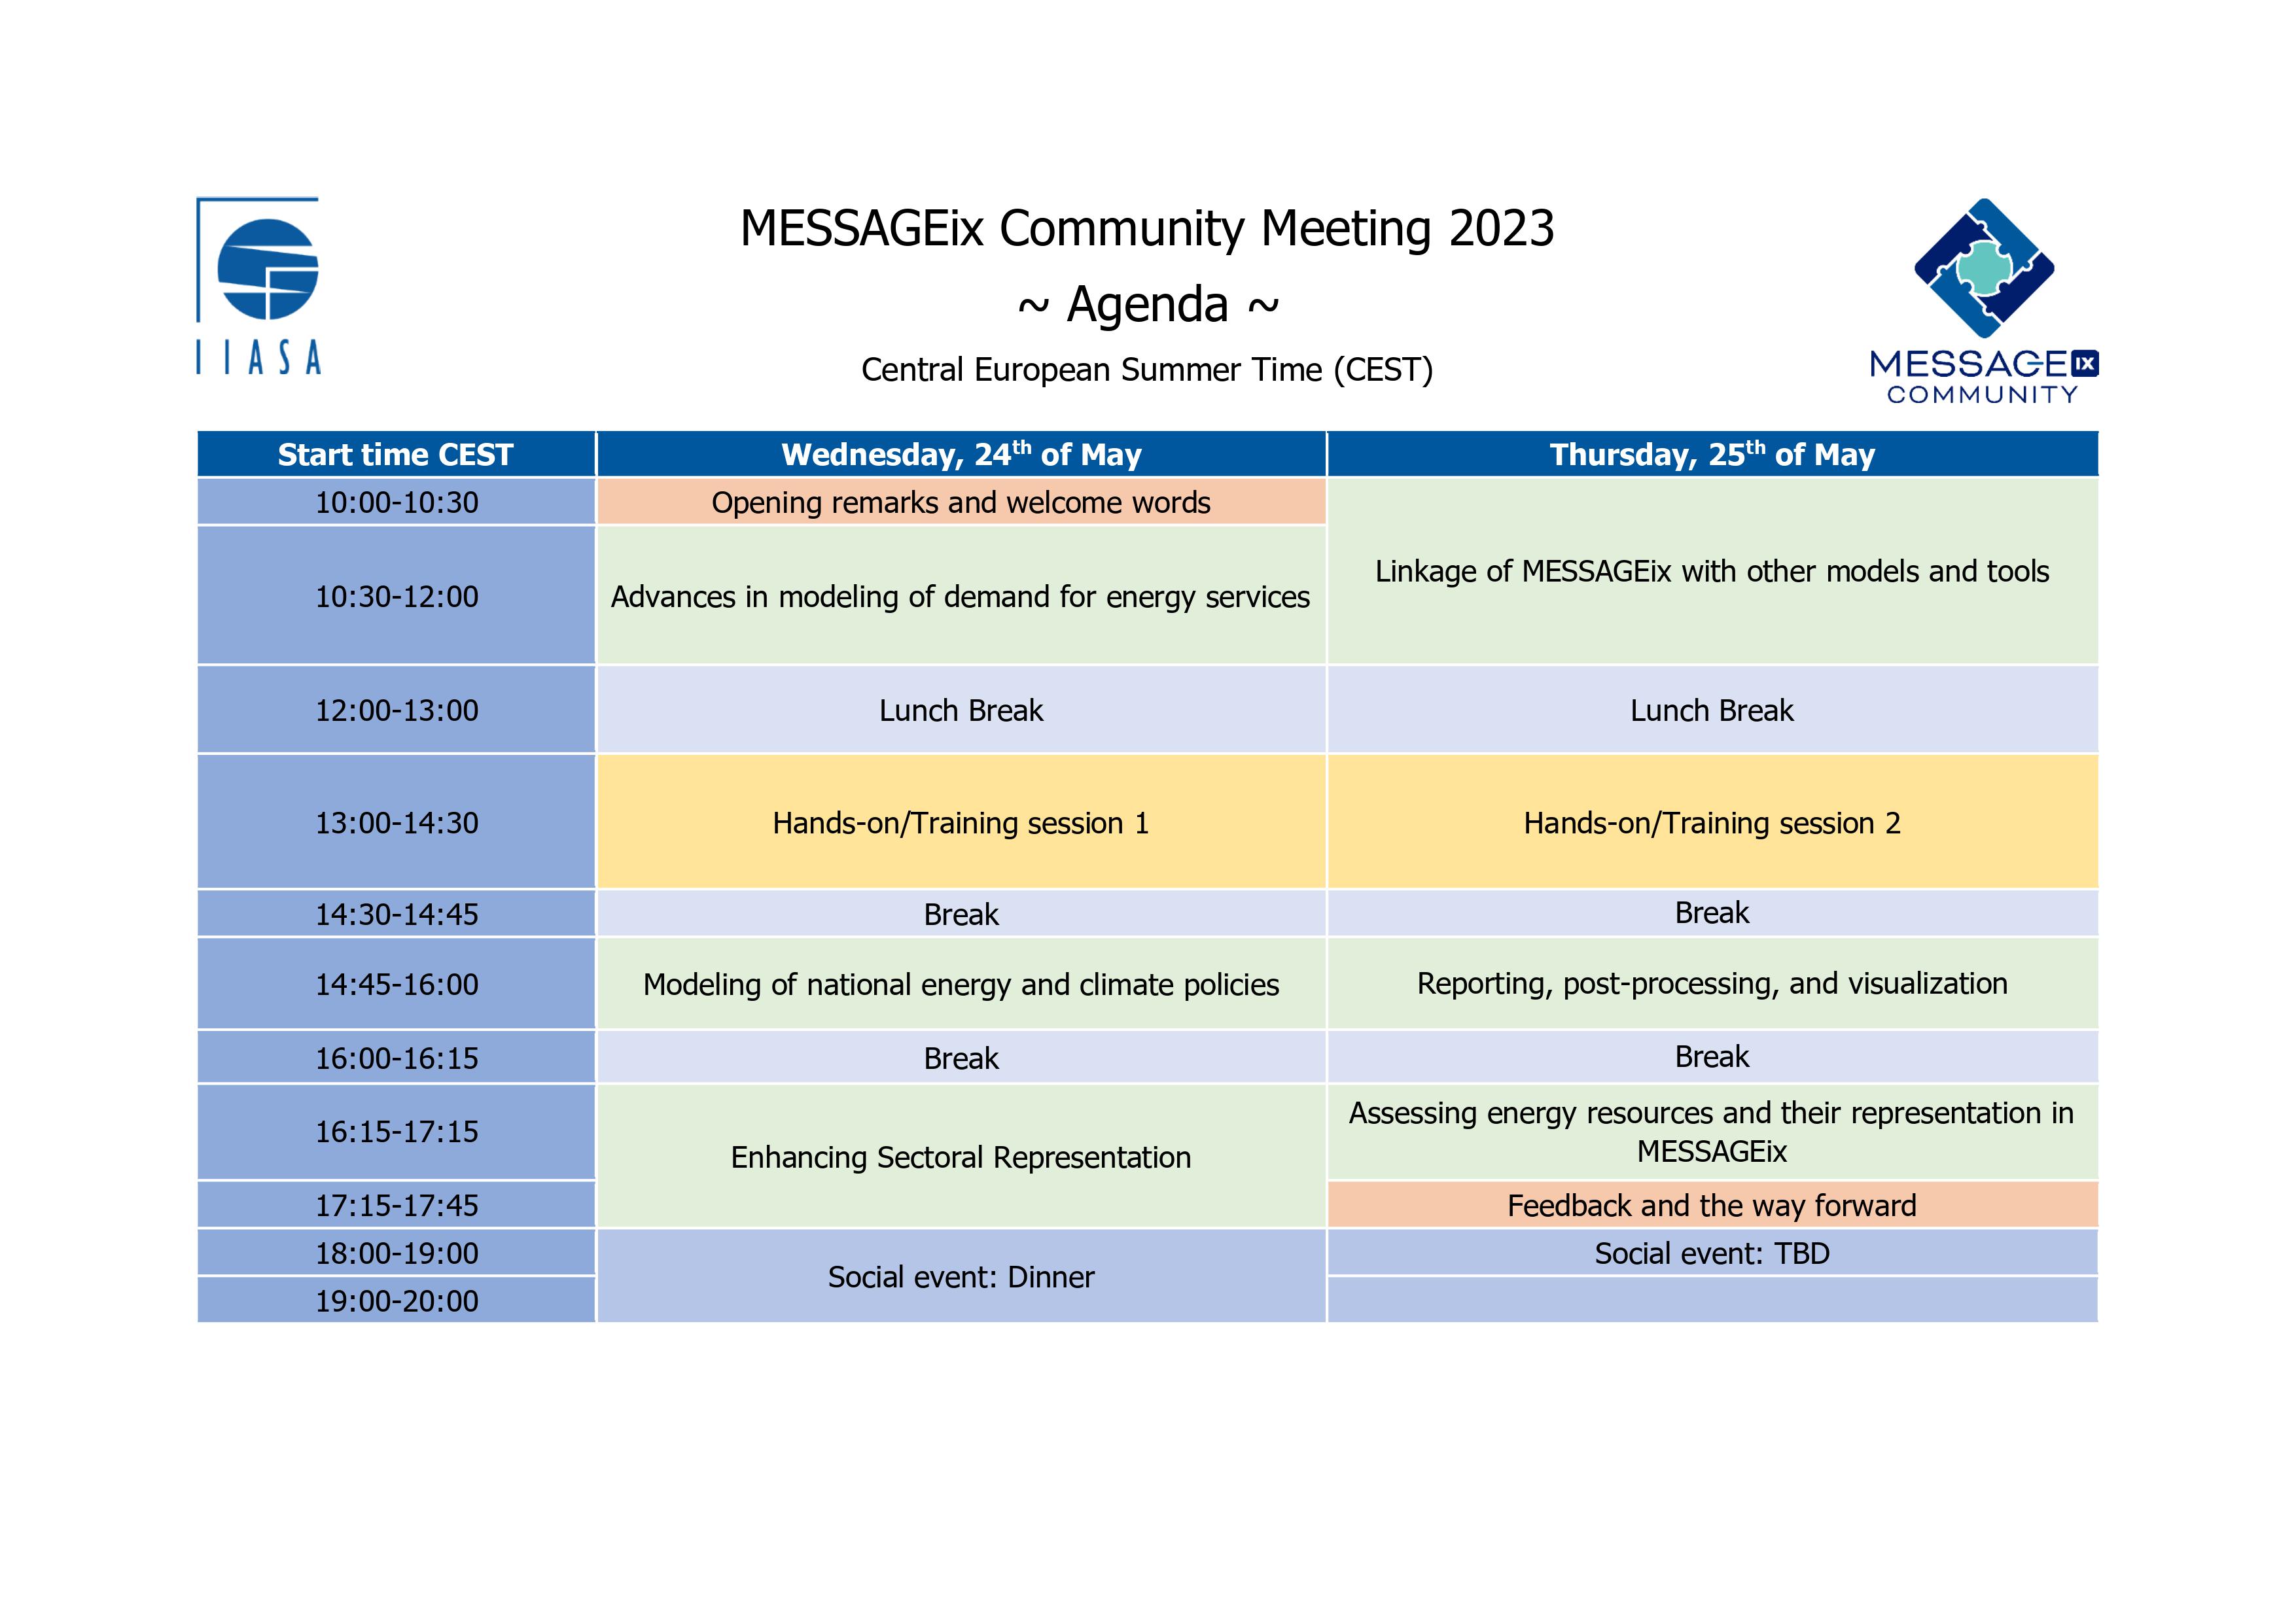 Preliminary agenda for the MESSAGEix community meeting 2023